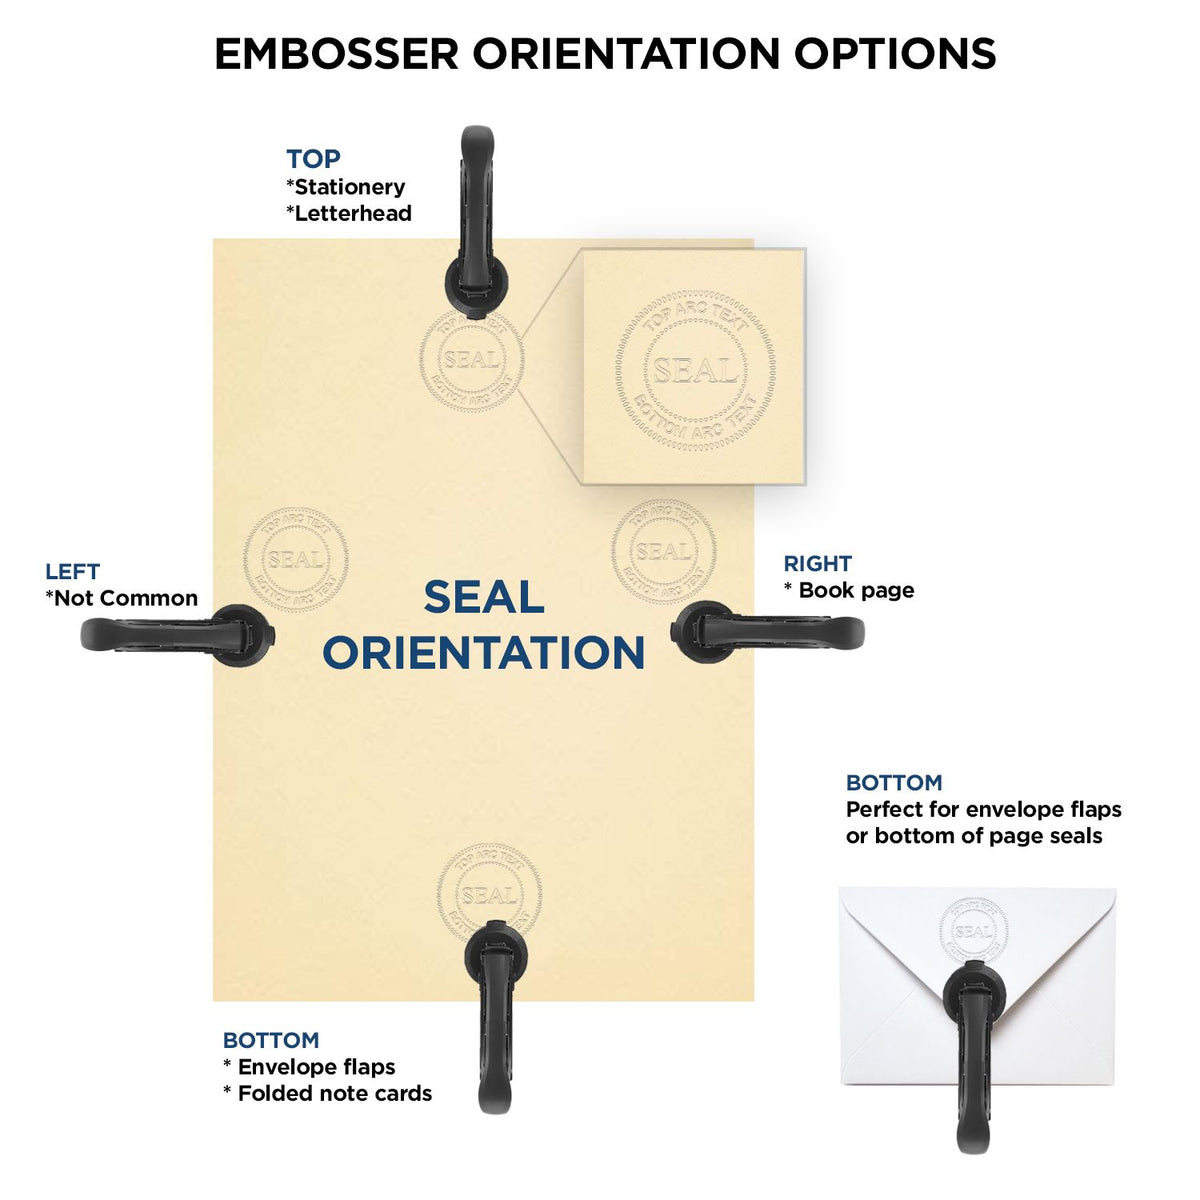 An infographic for the Handheld Mississippi Professional Engineer Embosser showing embosser orientation, this is showing examples of a top, bottom, right and left insert.